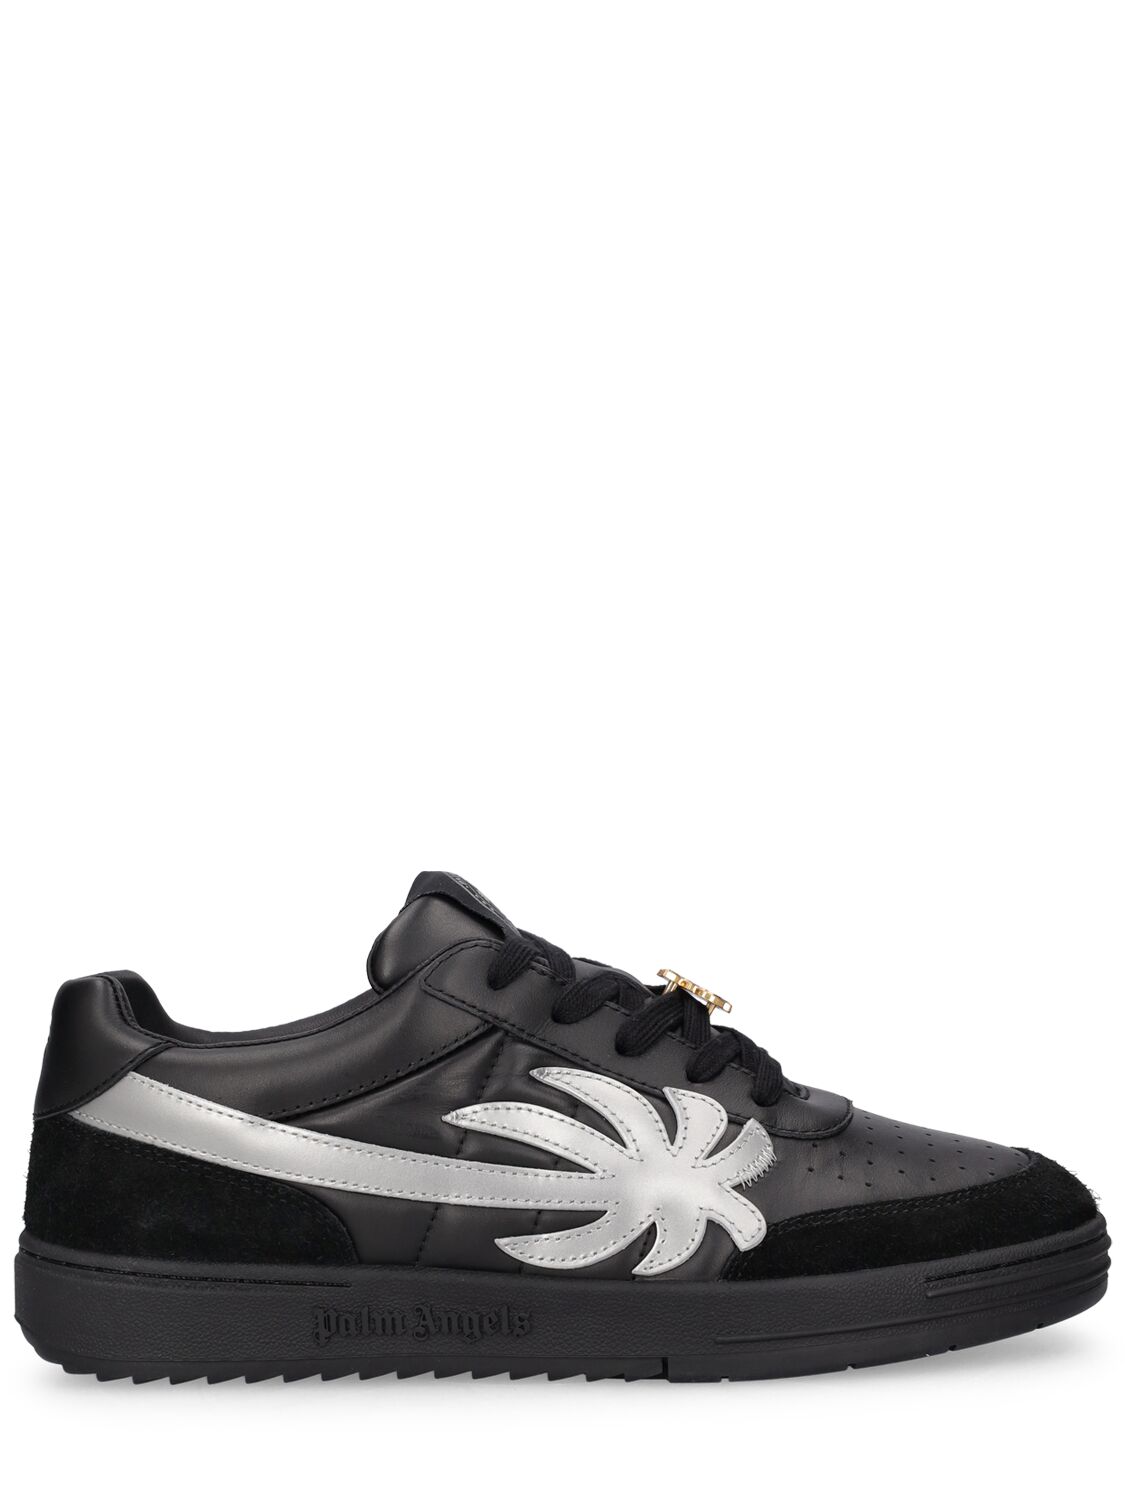 Palm Angels Palm Beach Leather Sneakers In Black,silver